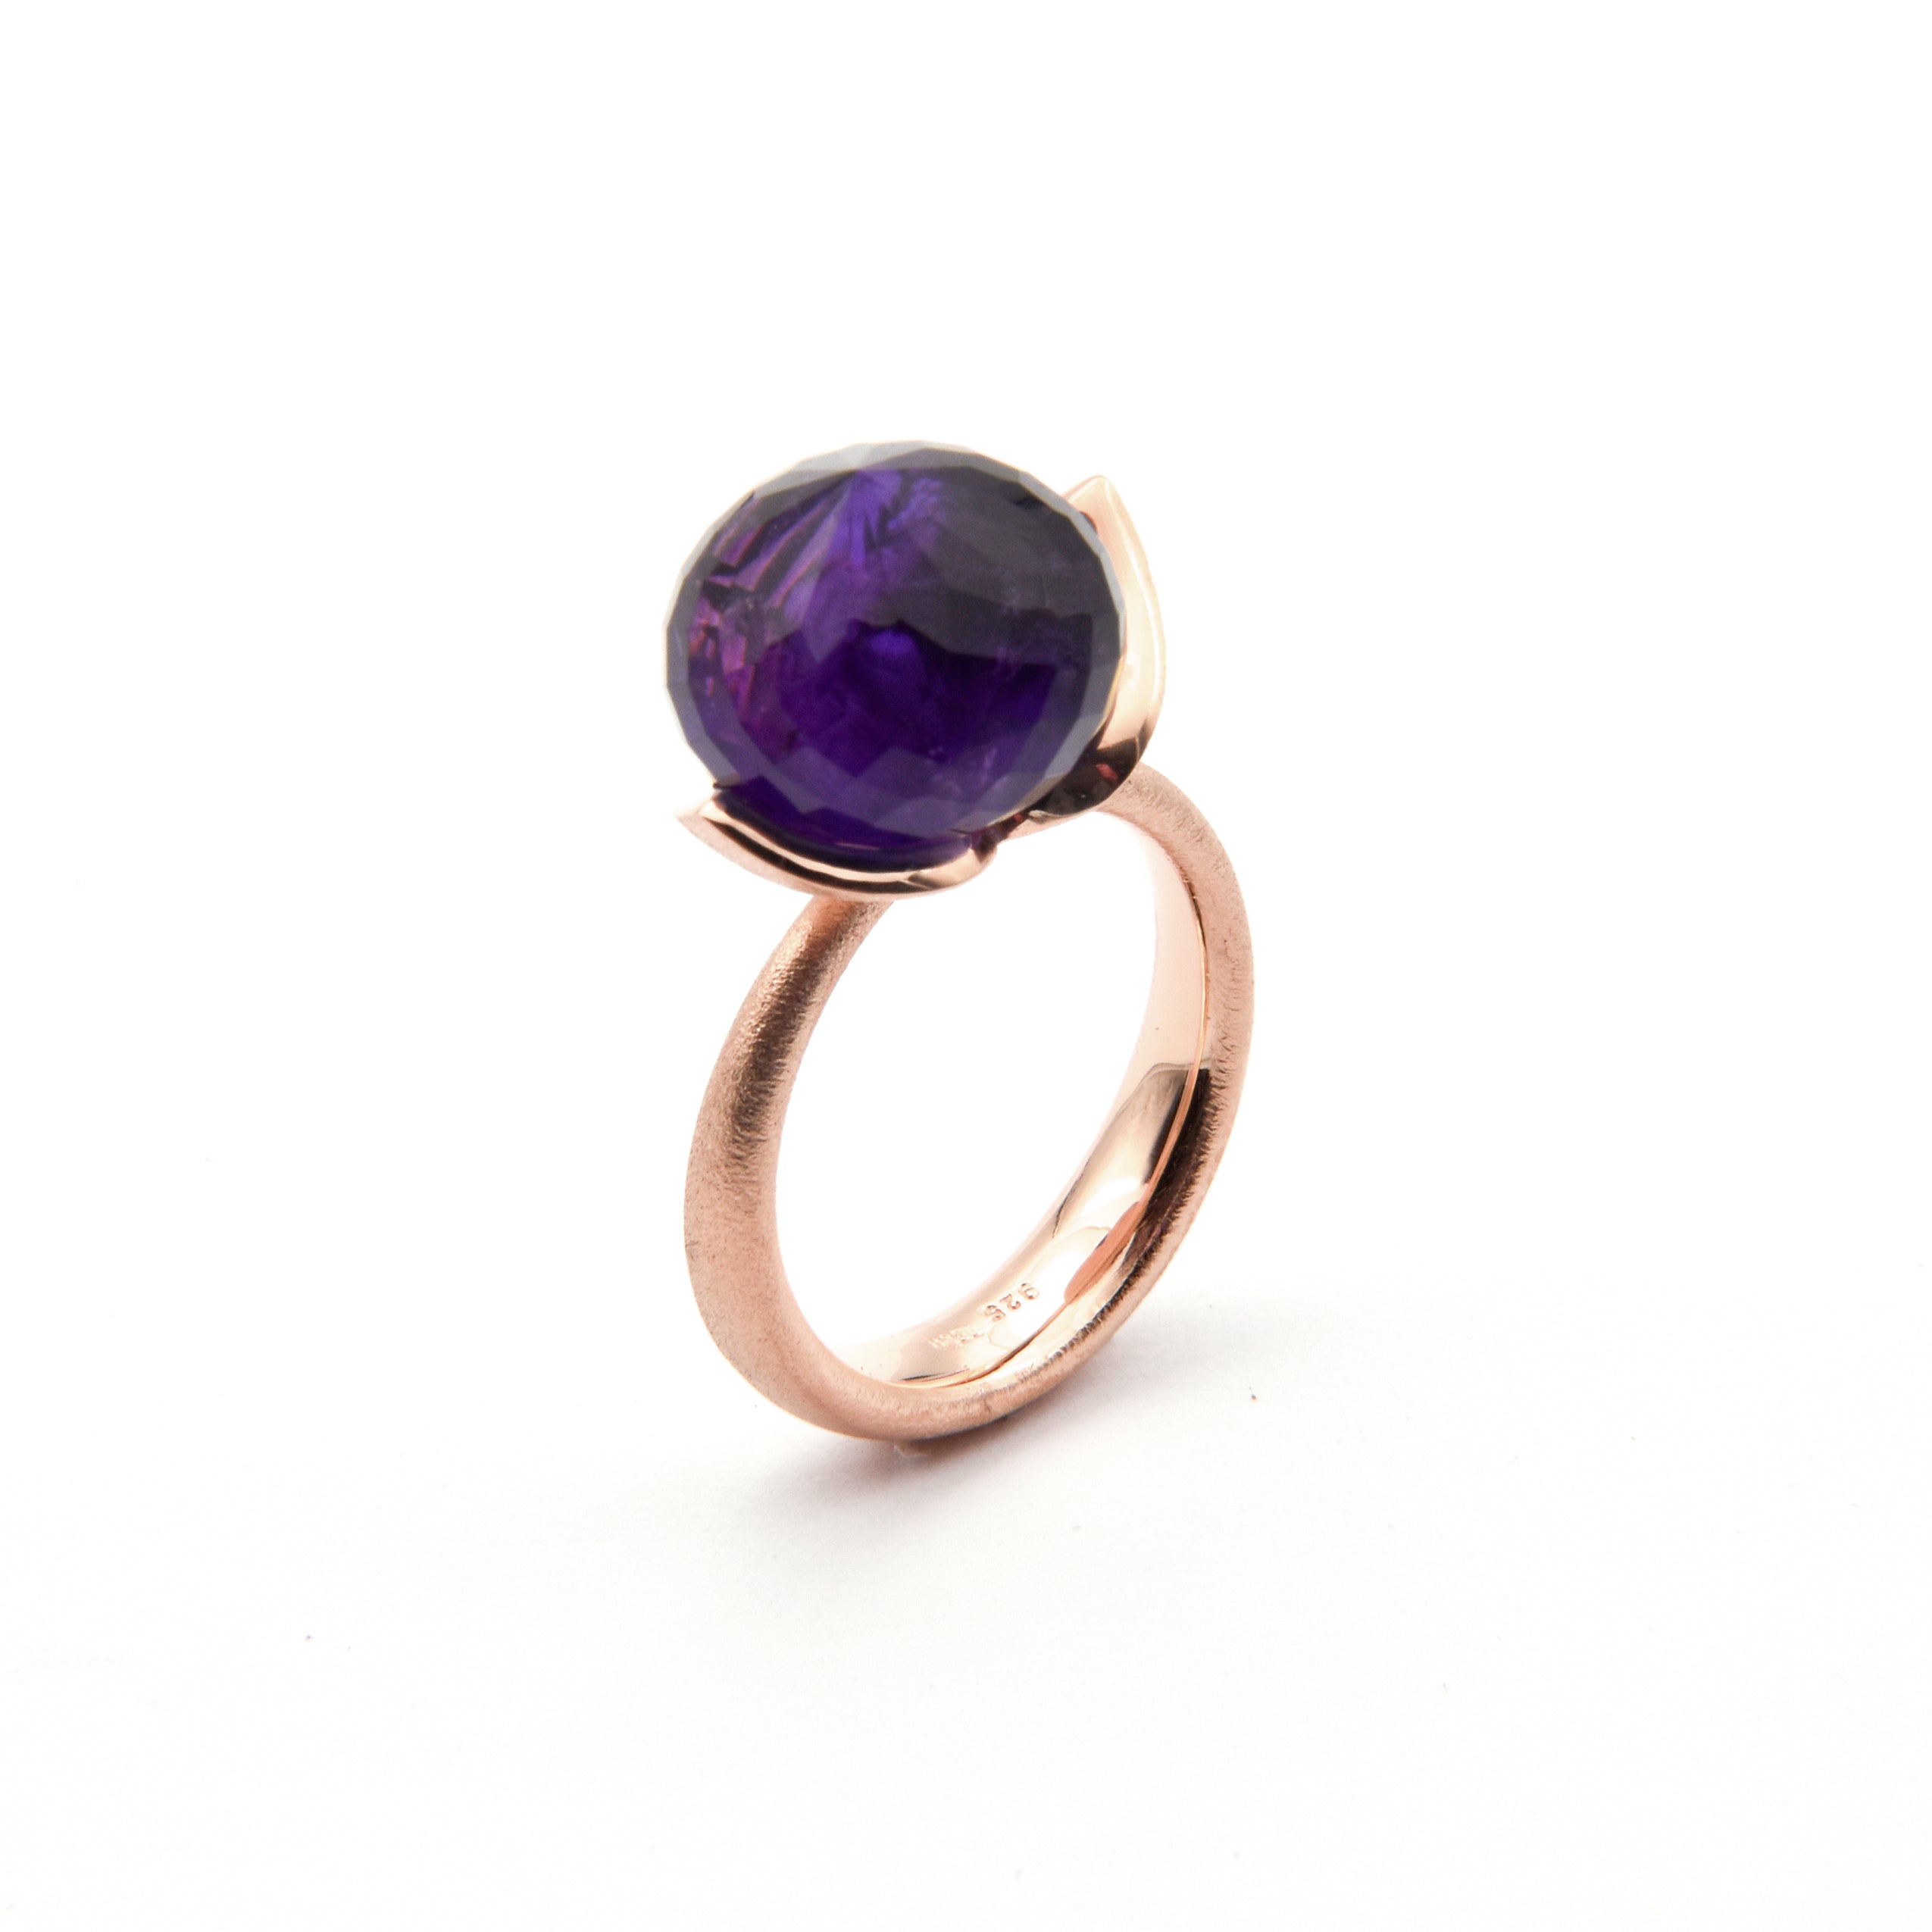 Dolce ring "big" with amethyst 925/-